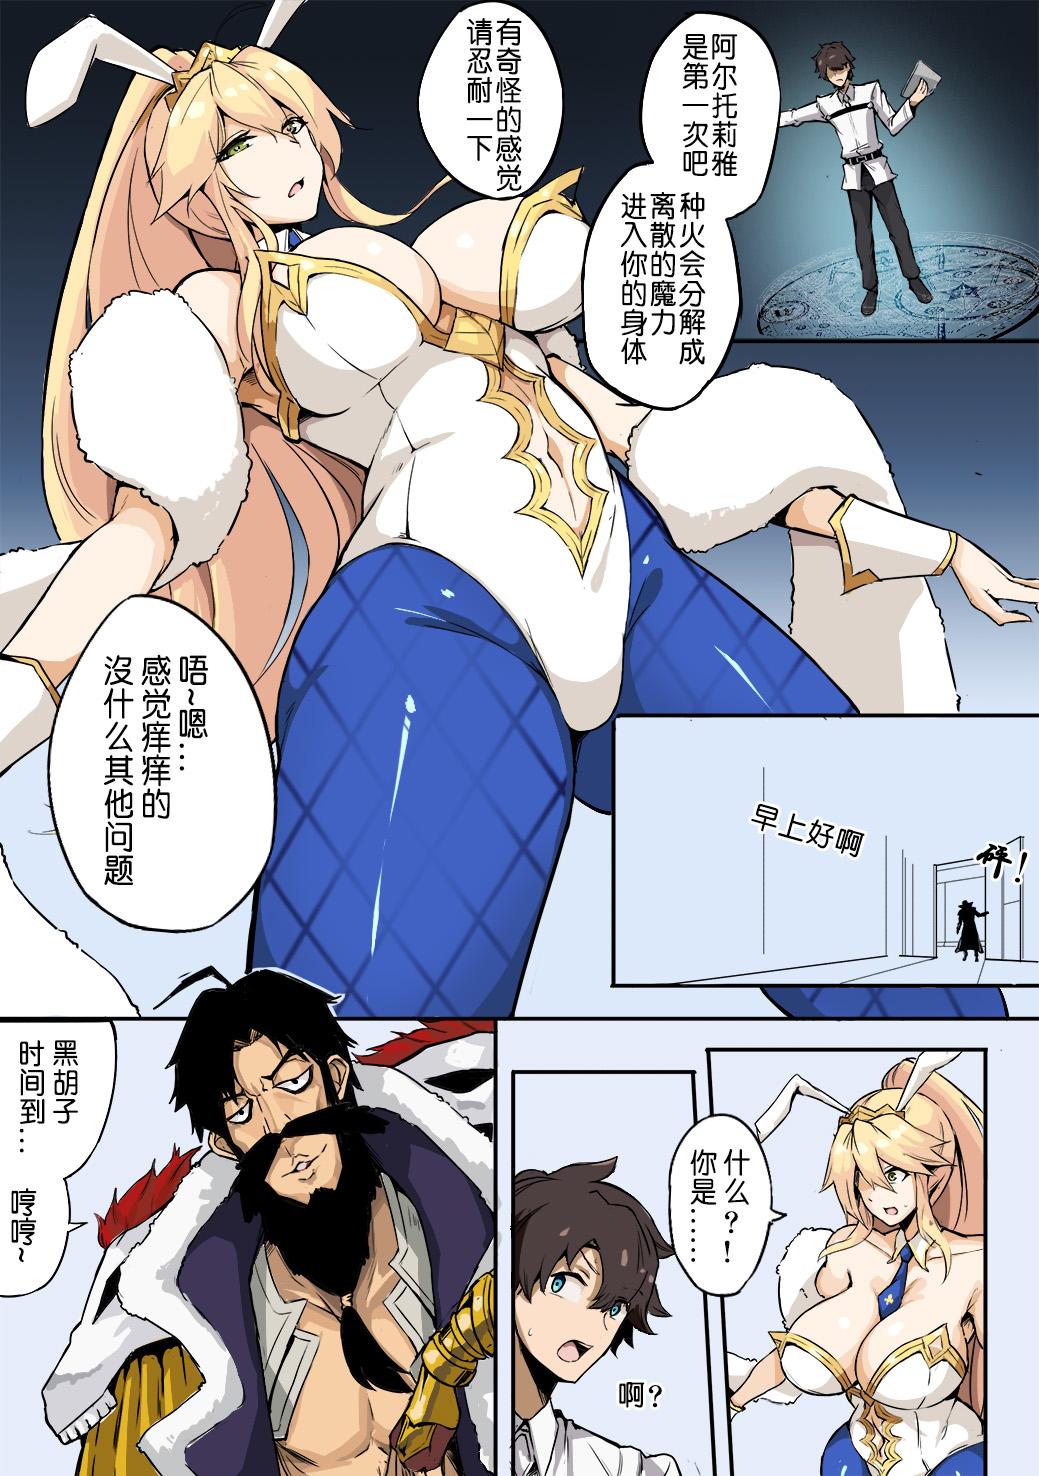 Ass Licking fate 黑胡子的阴谋 - Fate grand order Teen Sex - Page 2